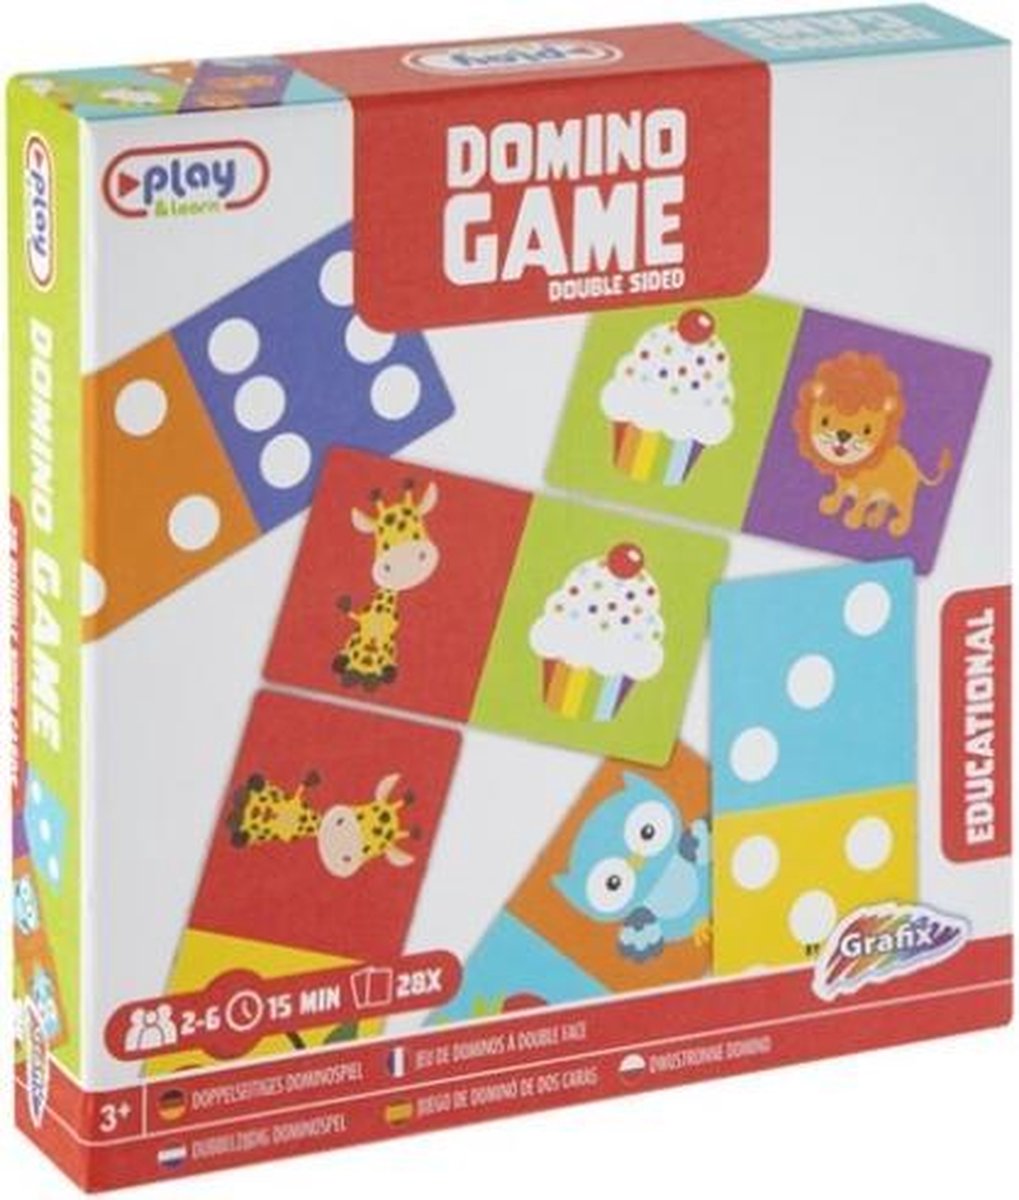 Afbeelding van product Domino game dubble sided